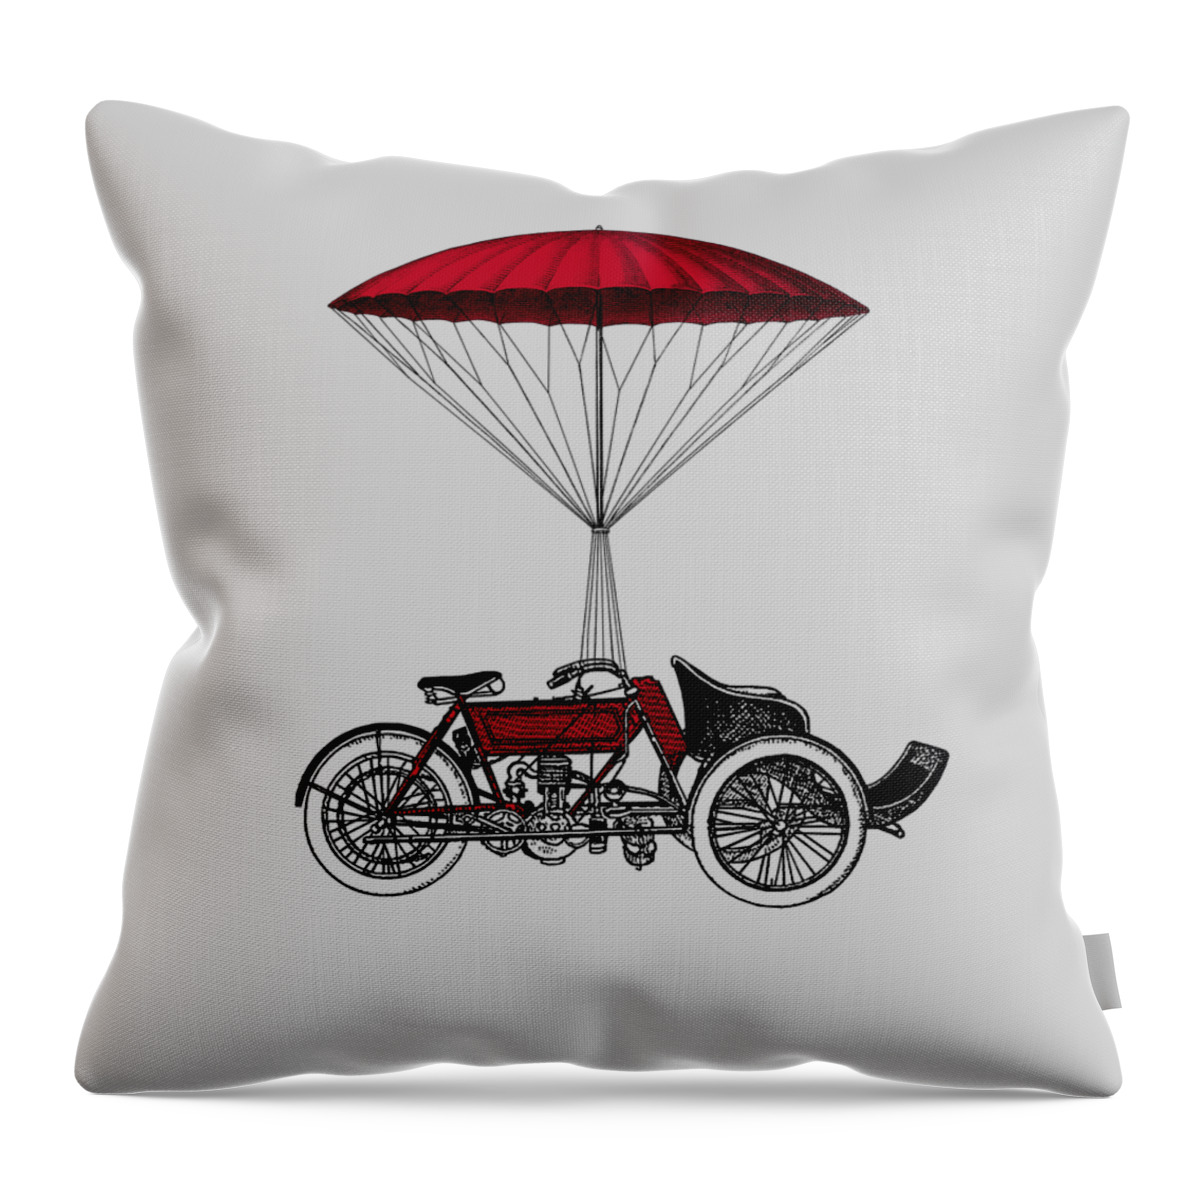 Moto Throw Pillow featuring the digital art Red Trike On Parachute by Madame Memento